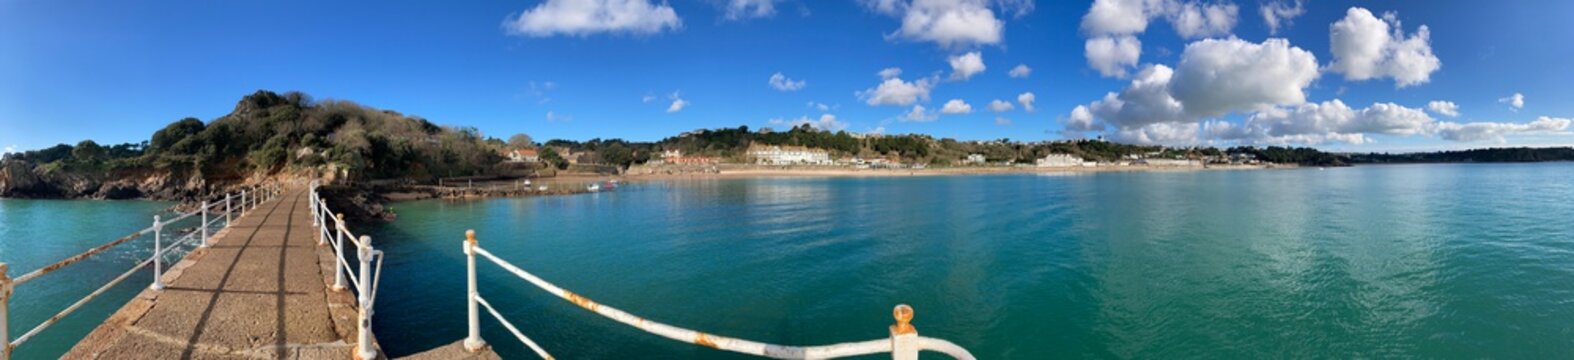 St Brelades Bay, Jersey, U.K. Panoramic image of a beautiful bay on a sunny Winter day shot from the pier.